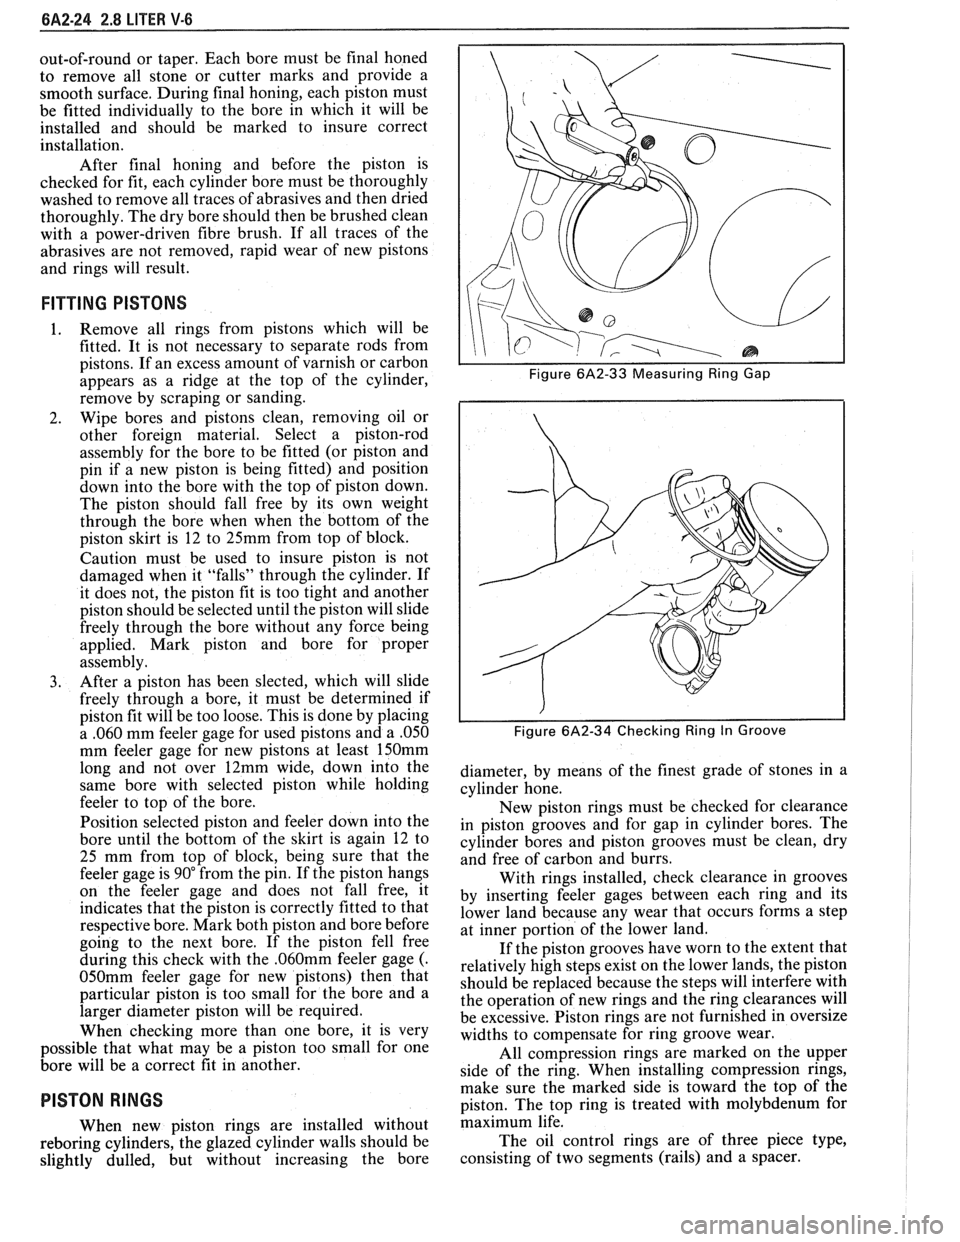 PONTIAC FIERO 1988  Service Repair Manual 
6A2-24 2.8 LITER V-6 
out-of-round or taper. Each  bore must  be final  honed 
to  remove  all  stone  or cutter  marks  and  provide a 
smooth  surface.  During final honing,  each  piston  must 
be